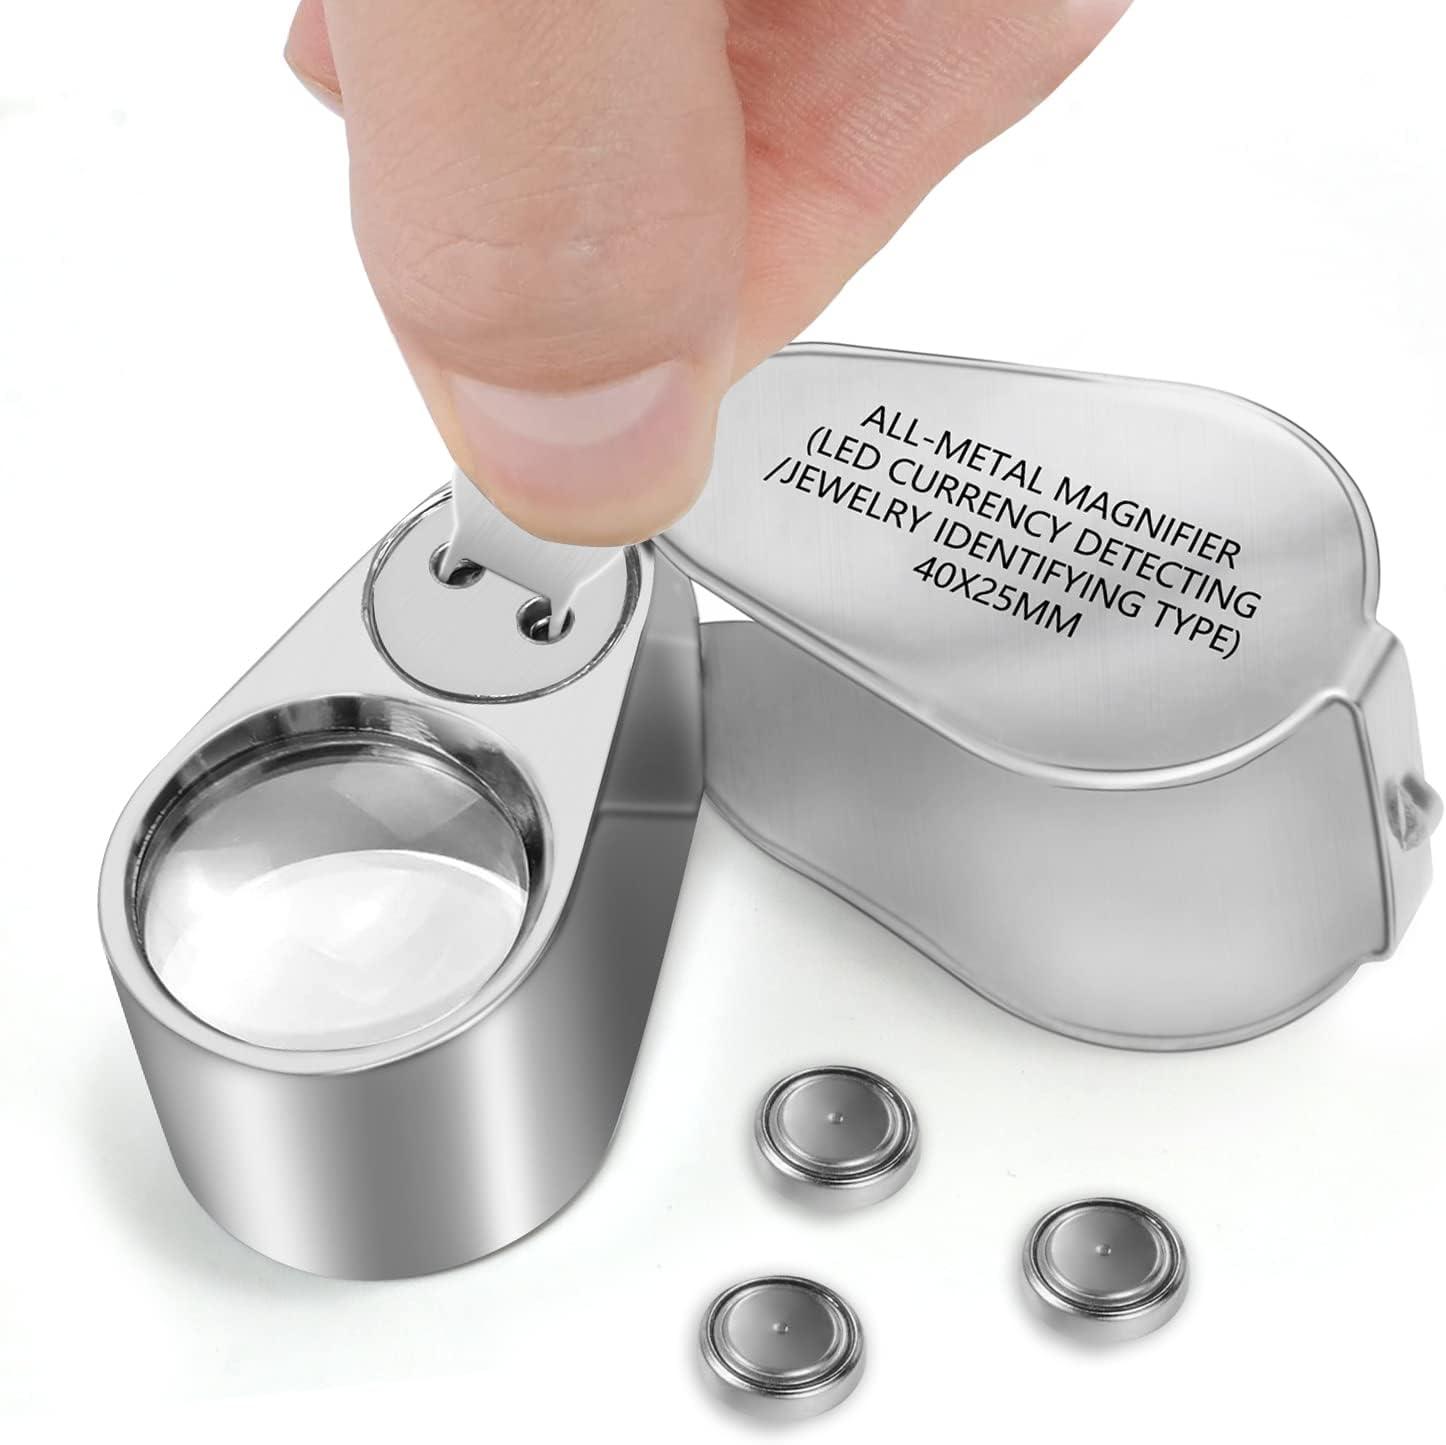 40x Full Metal Jewelry Loop Magnifier, Pocket Jewelers Eye Loupe, Best Magnifying Glass Folding LED/UV Illuminated Magnifiers for Rocks,Coins, Stamps